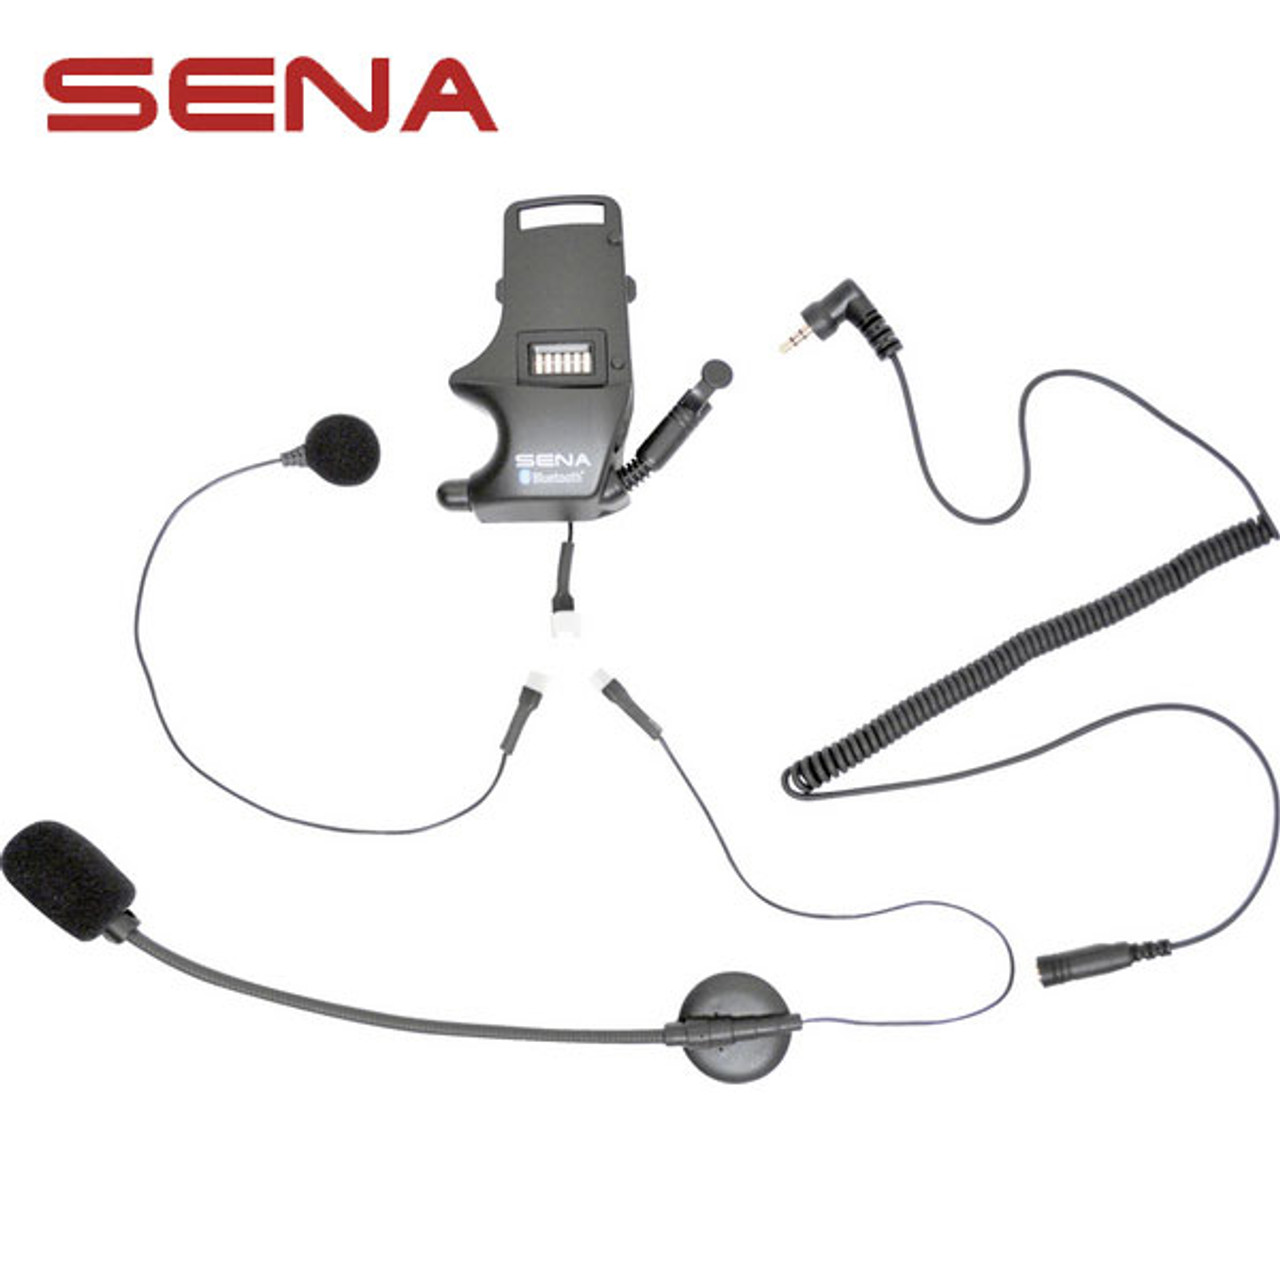 Sena SMH-10 Helmet Clamp Kit - Attachable Boom and Wired Microphone